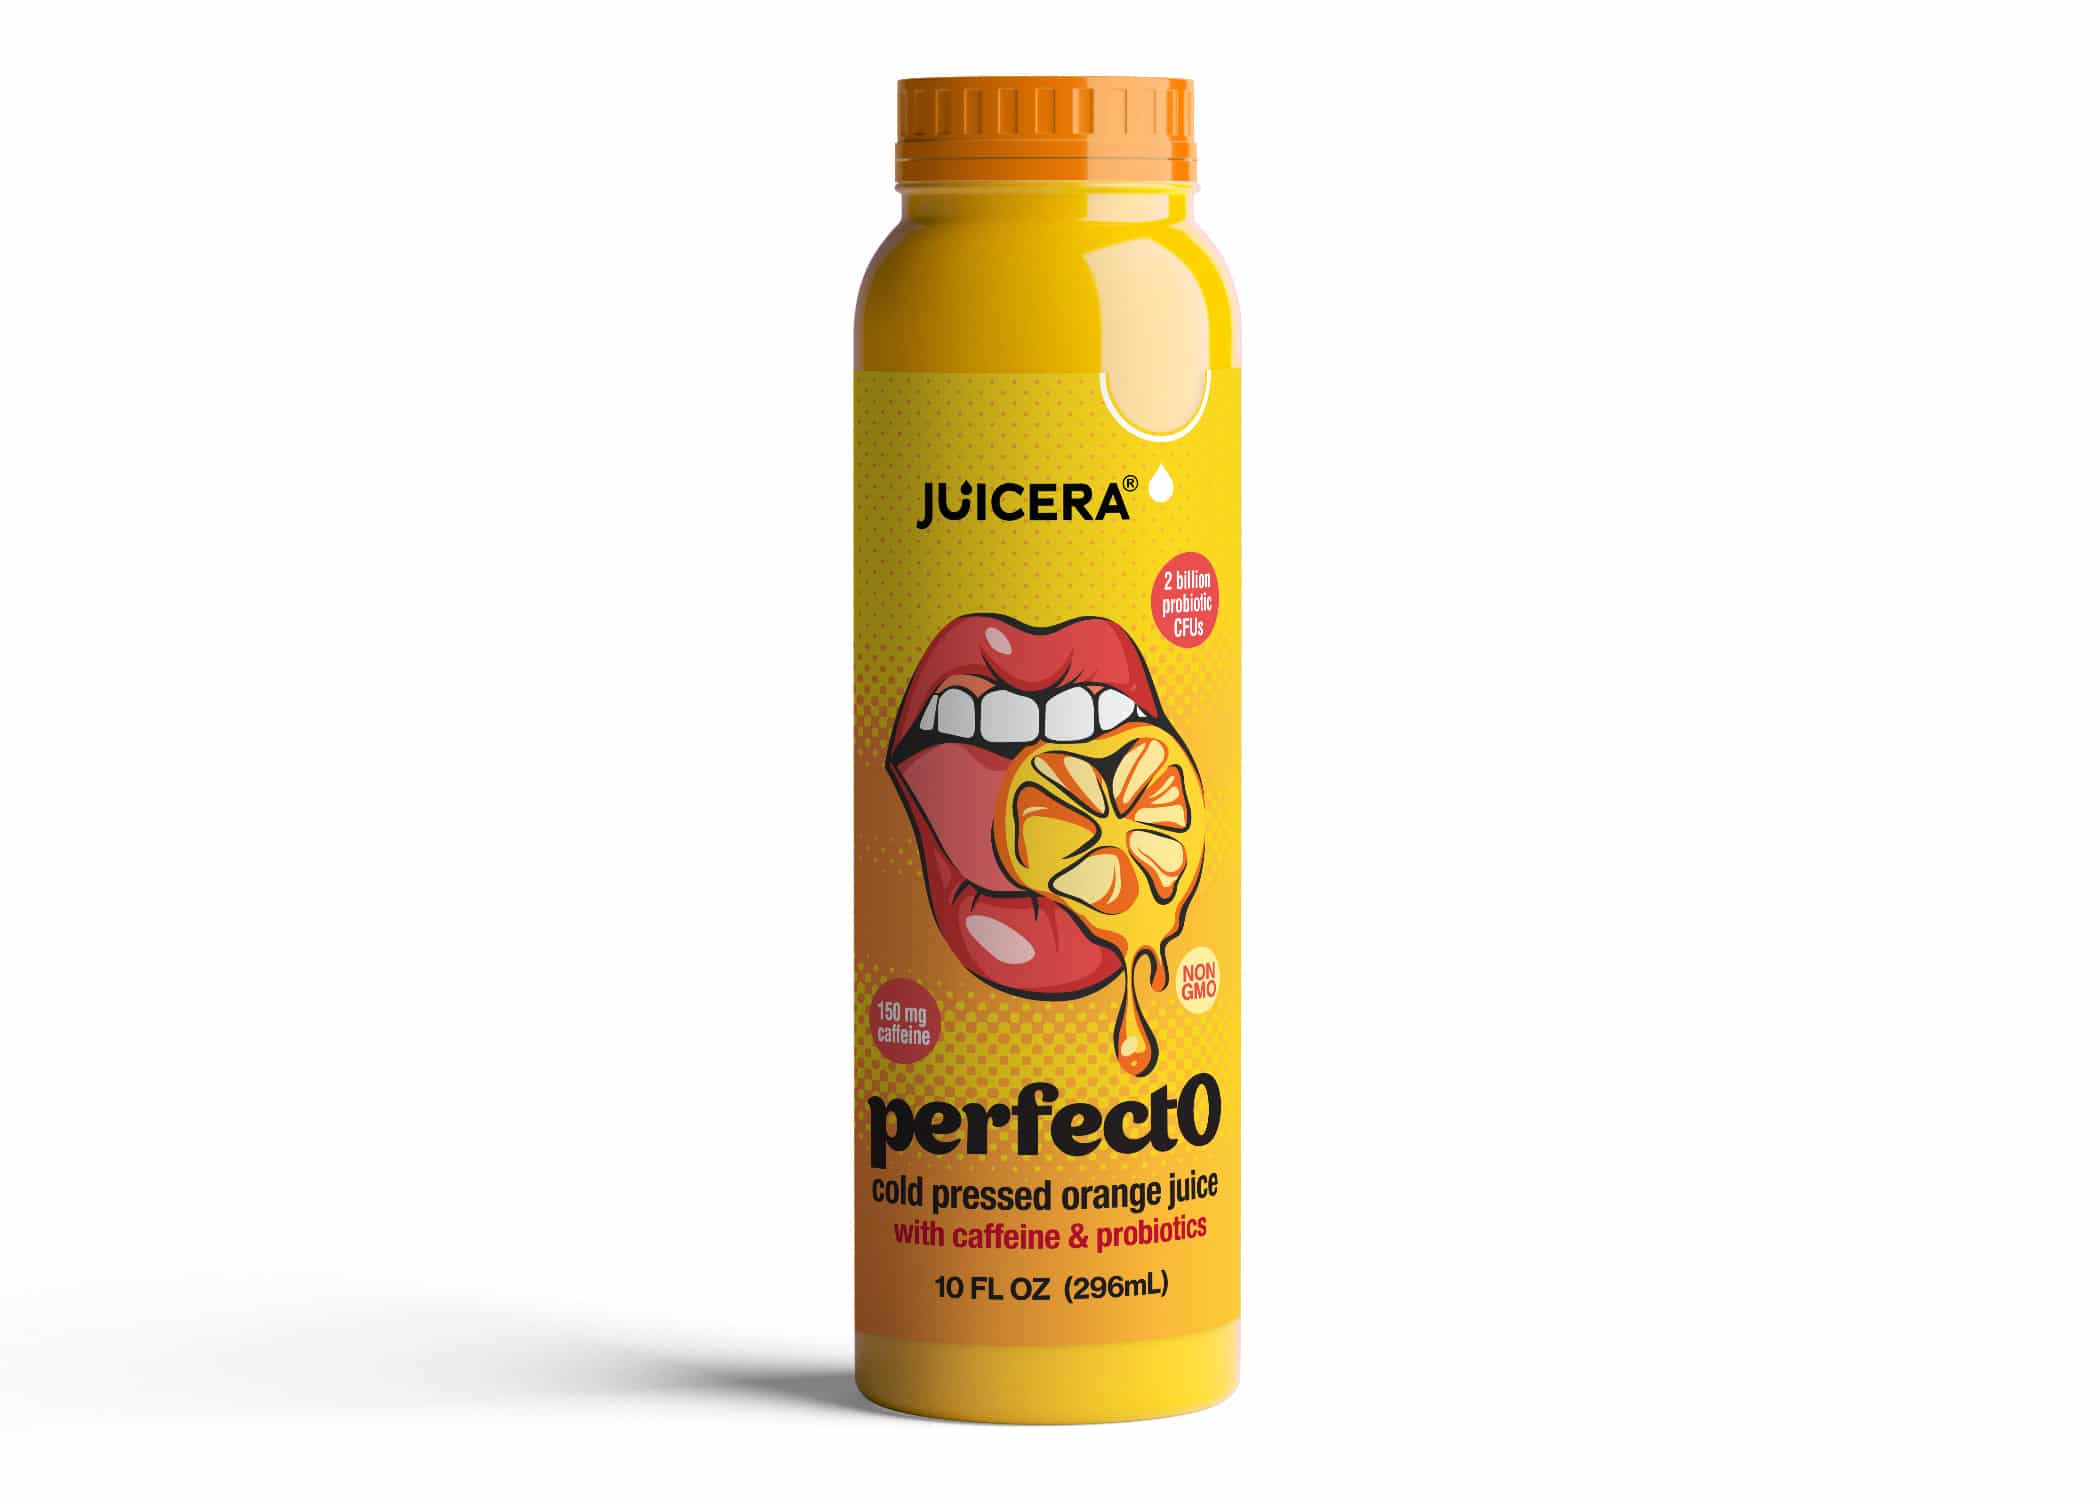 Juicera PerfectO pop art energy drink label design in bright yellow featuring an illustration of an open mouth with tongue sticking out.